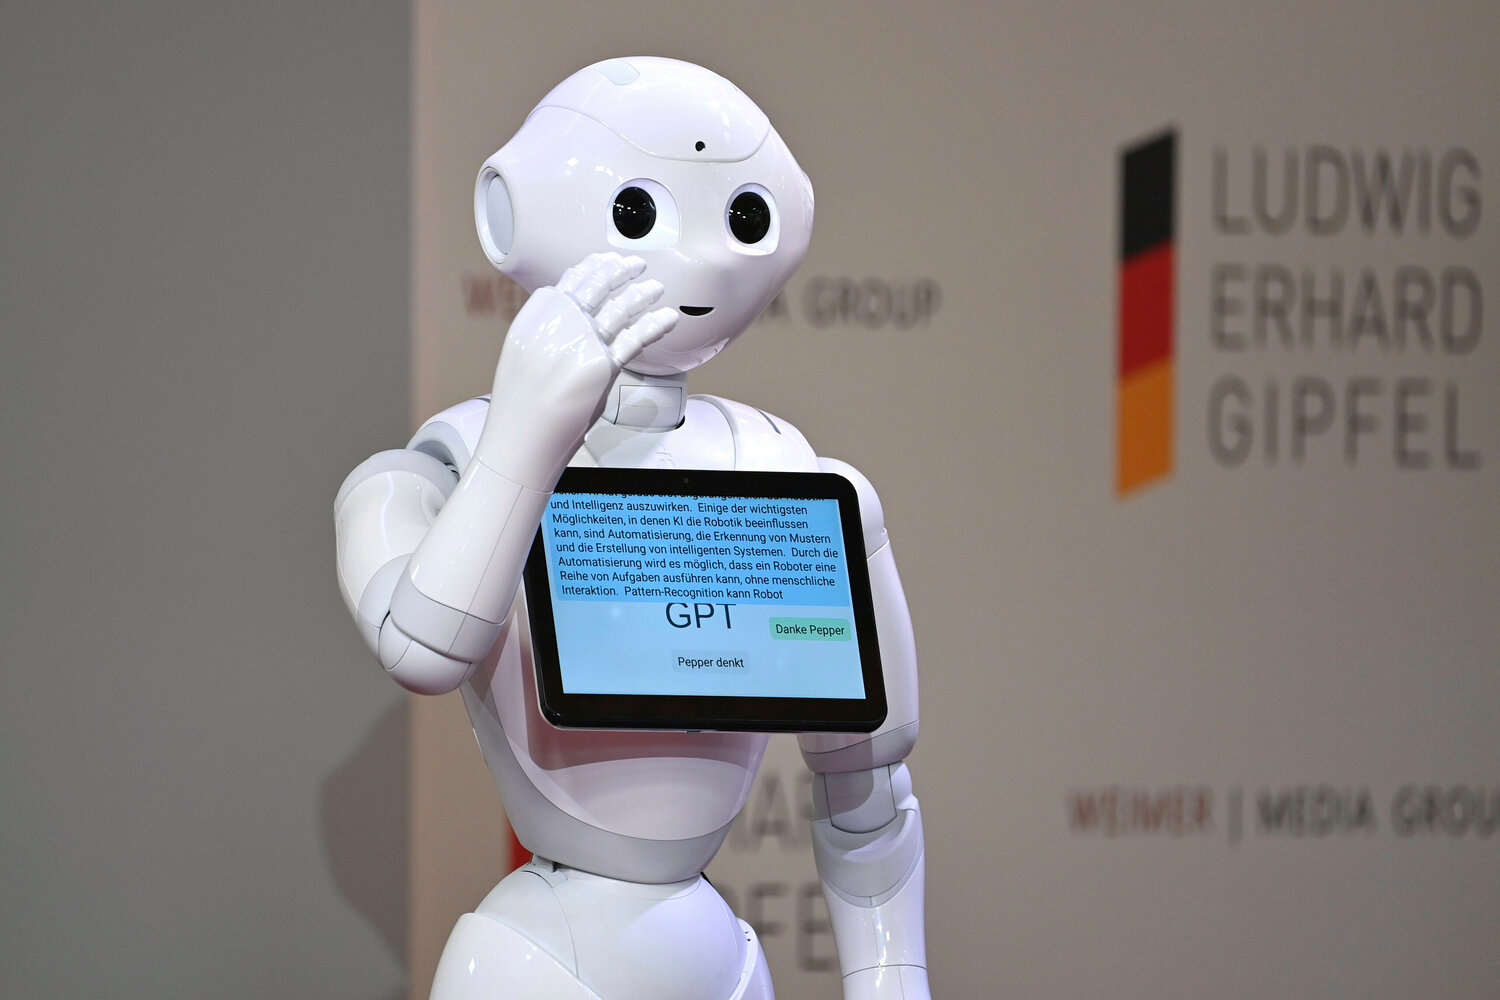 In a first, Proven Robotics is said to have successfully integrated ChatGPT with the humanoid robot Pepper.